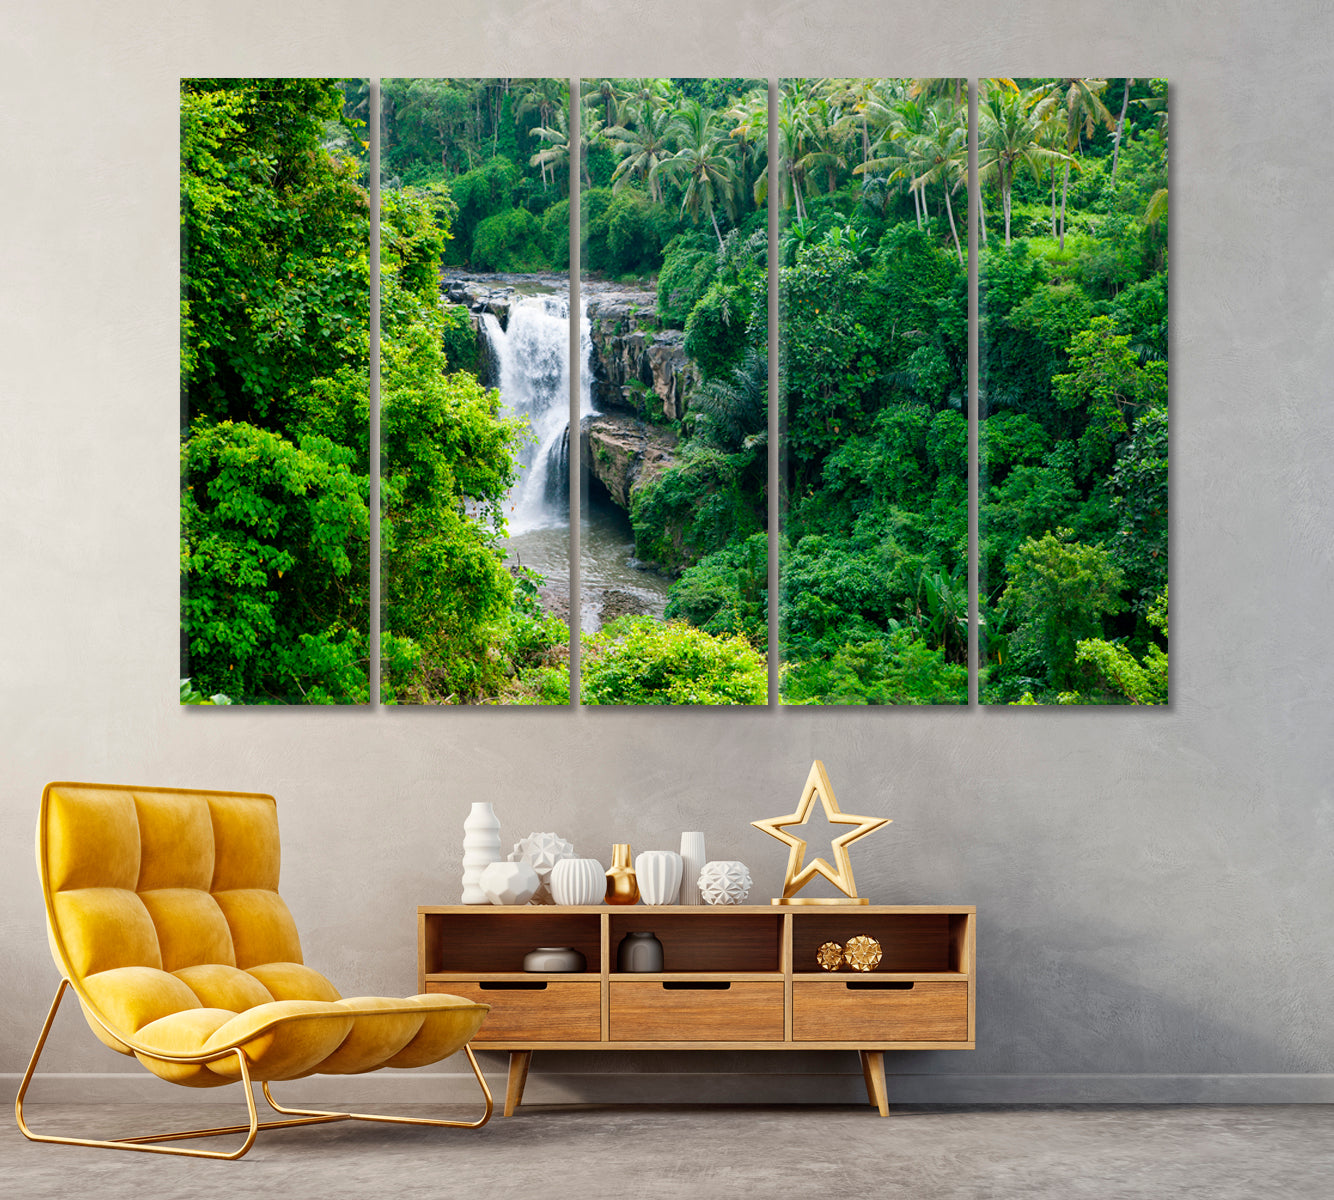 Jungle Waterfall Canvas Print ArtLexy 5 Panels 36"x24" inches 